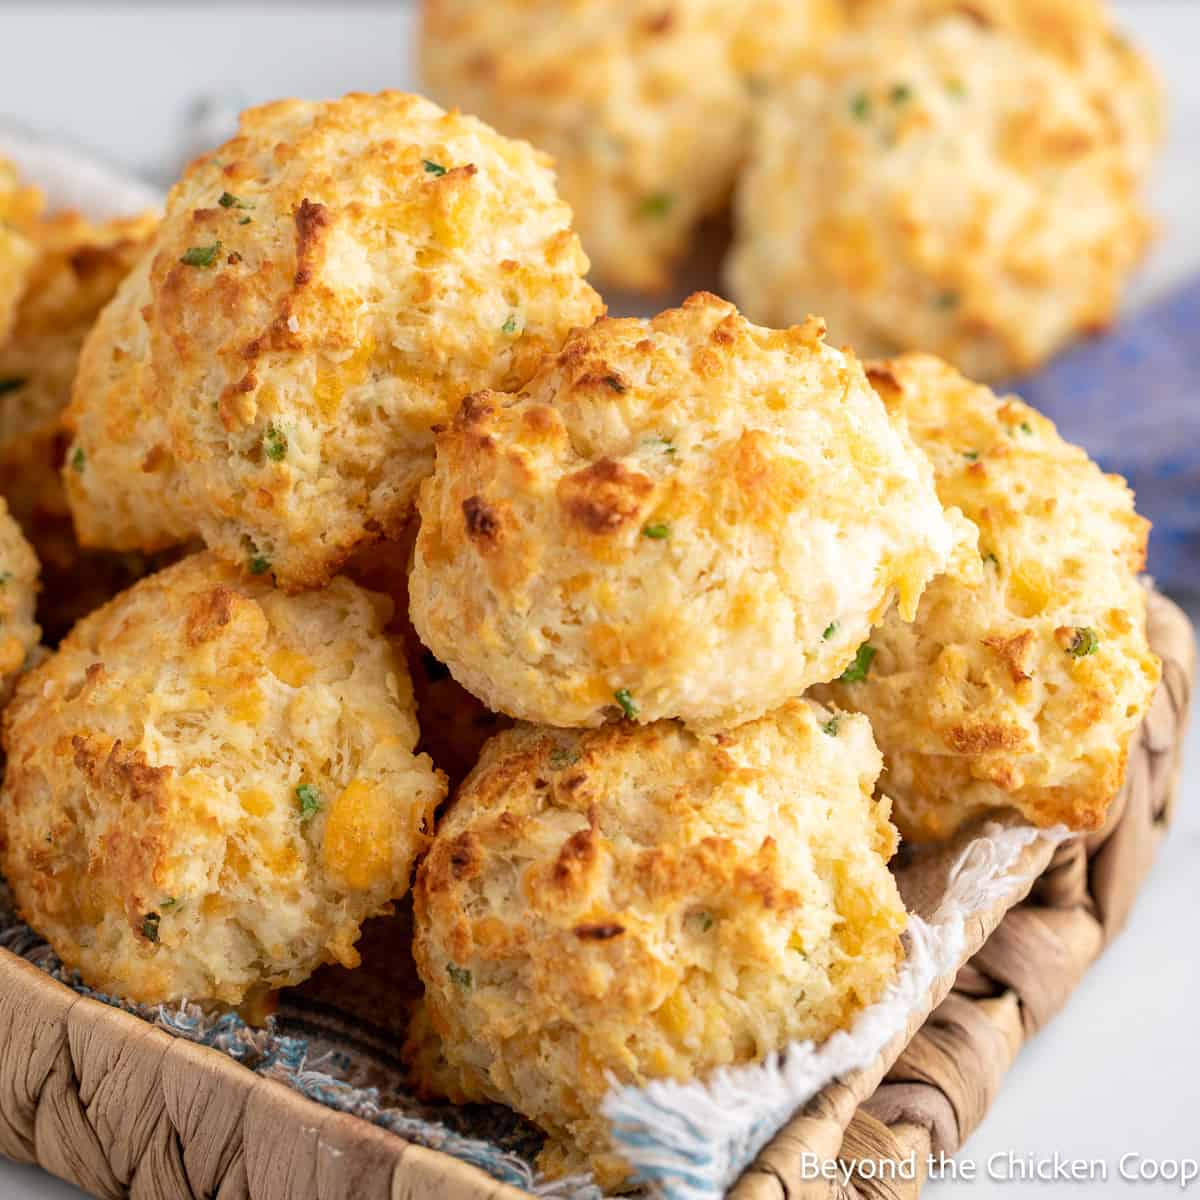 A basket filled with cheddar biscuits.